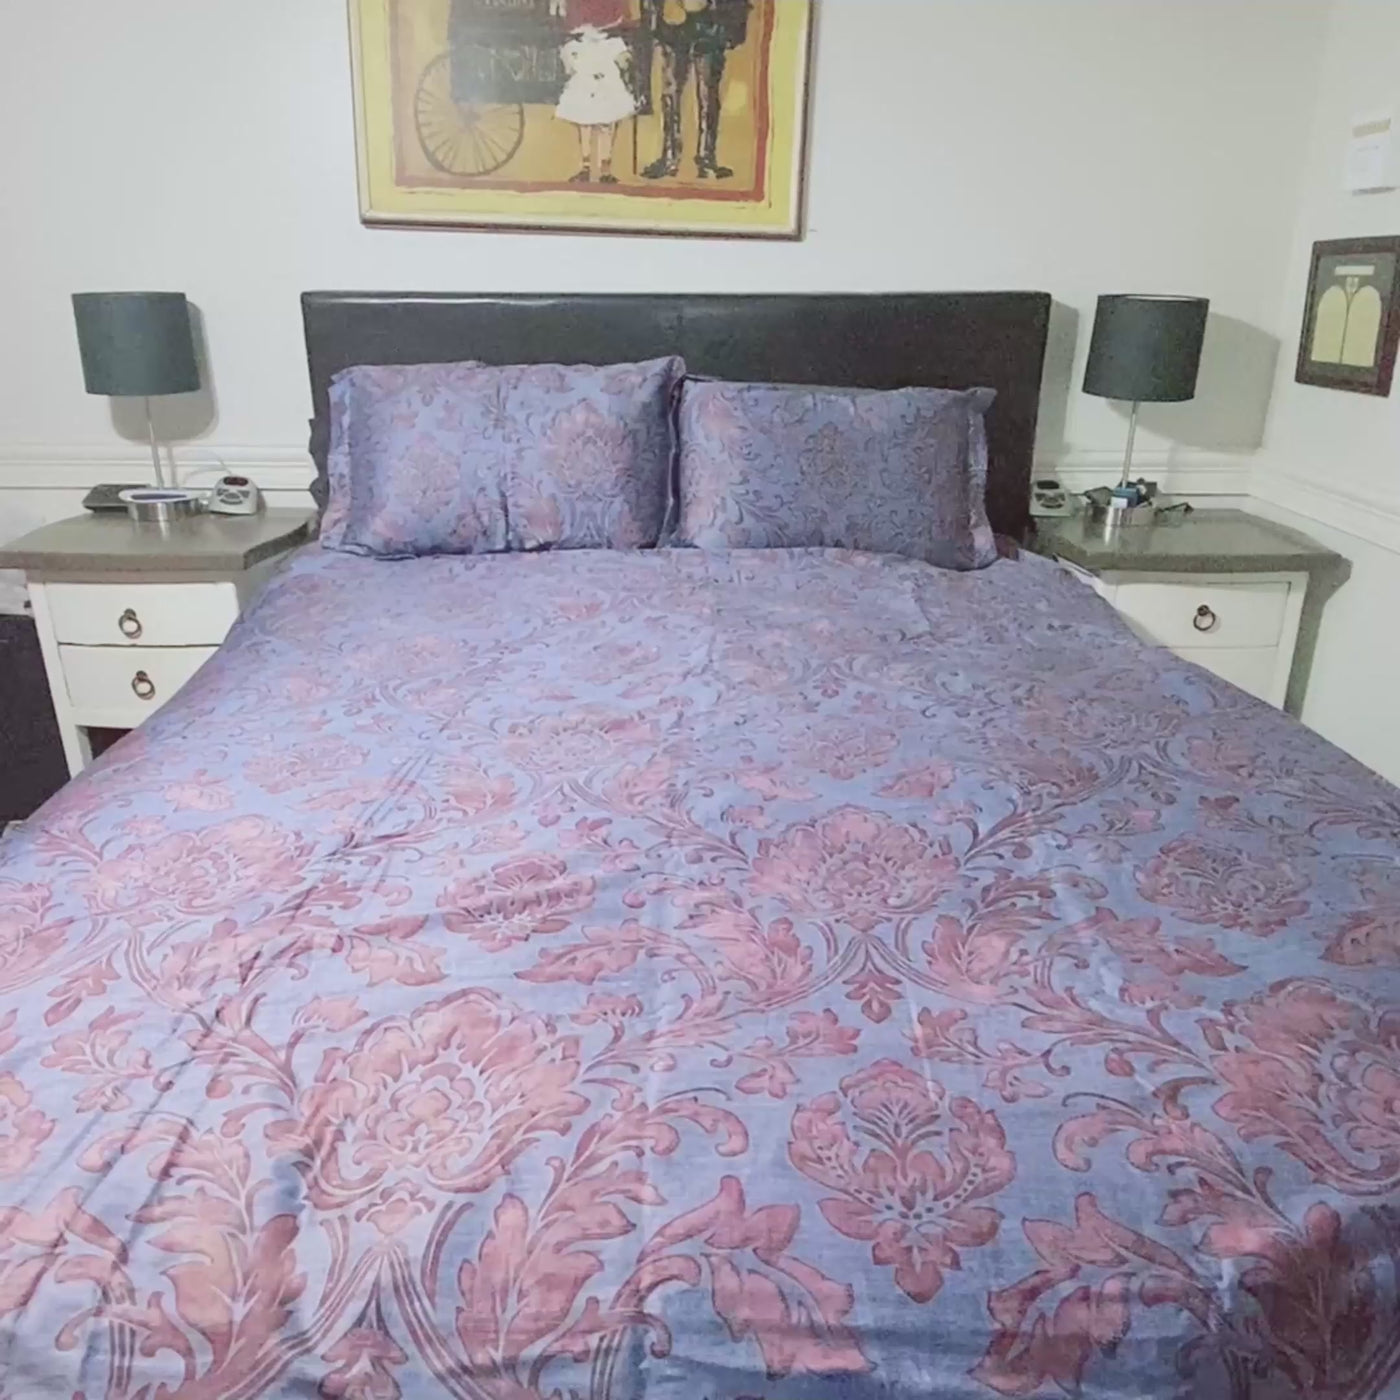 Video of French Garden Duvet Cover Set Showing Features#color_french-garden-blue